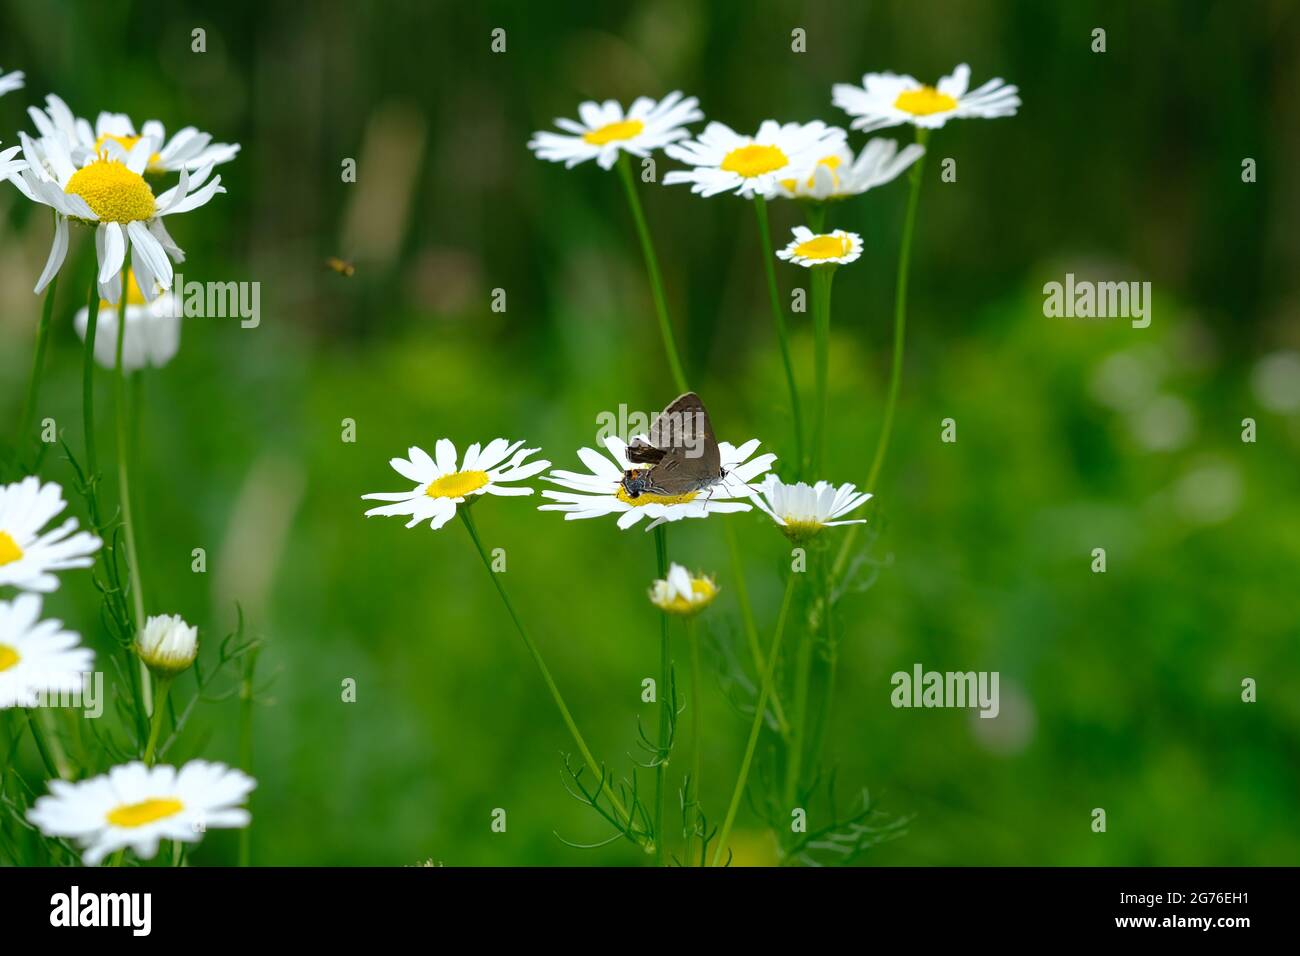 Brown butterfly on a daisy in a field of green. Stock Photo